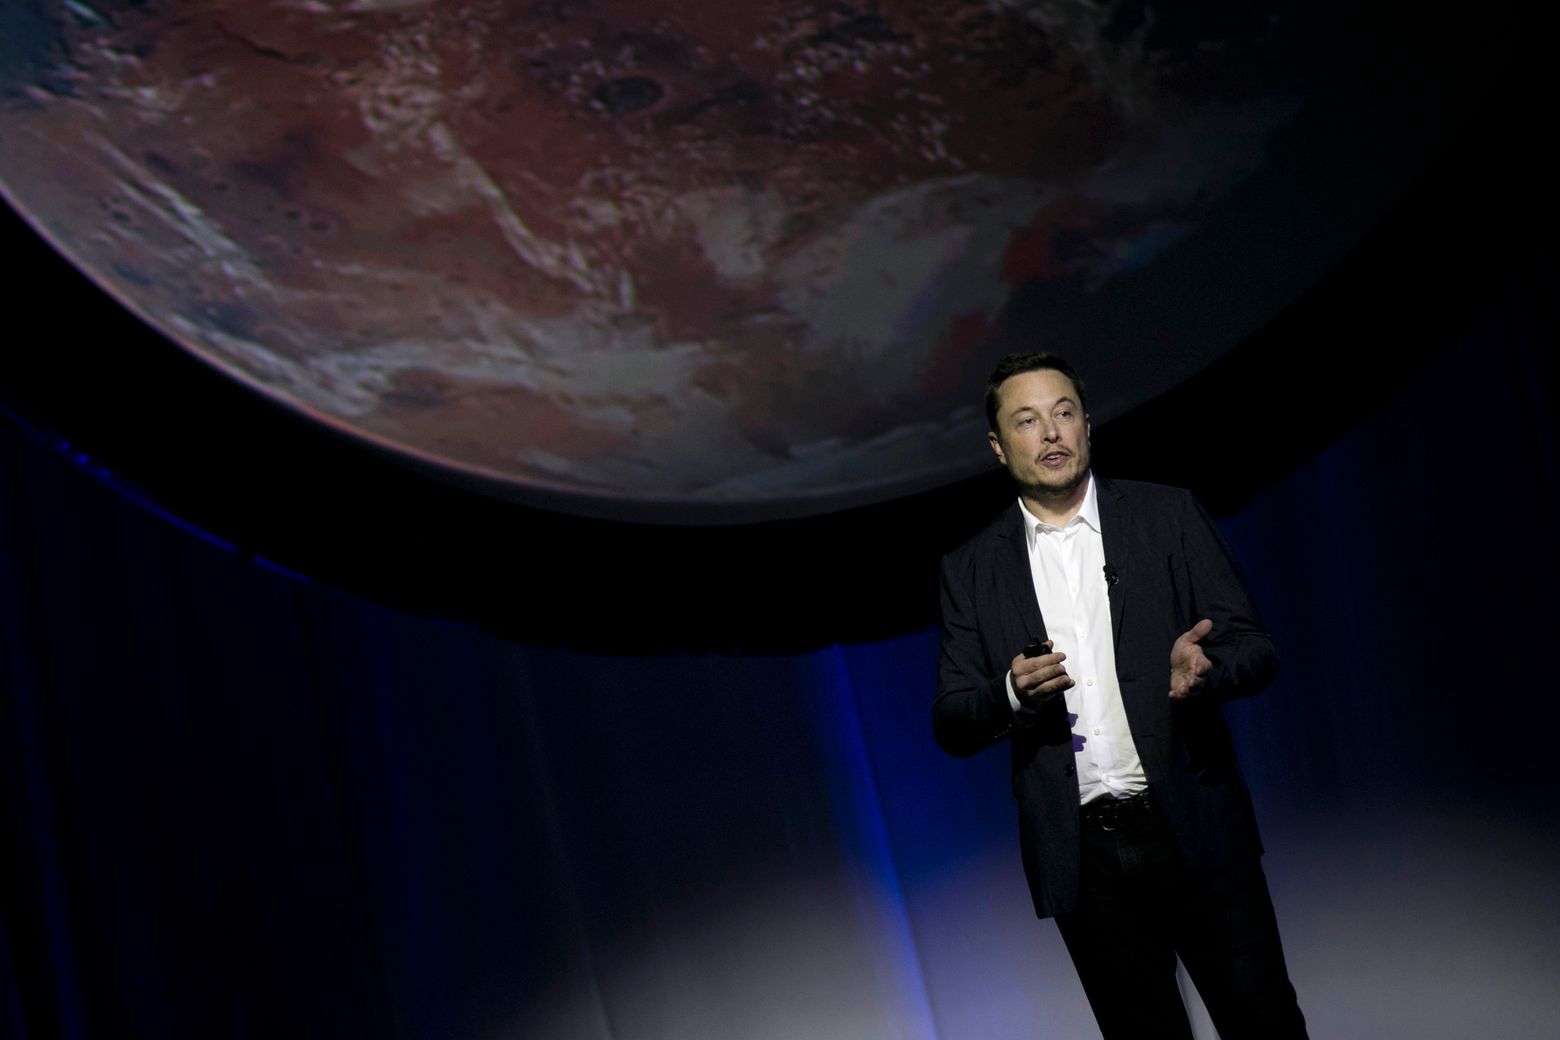 SpaceX’s Elon Musk elaborates on plan to colonize Mars